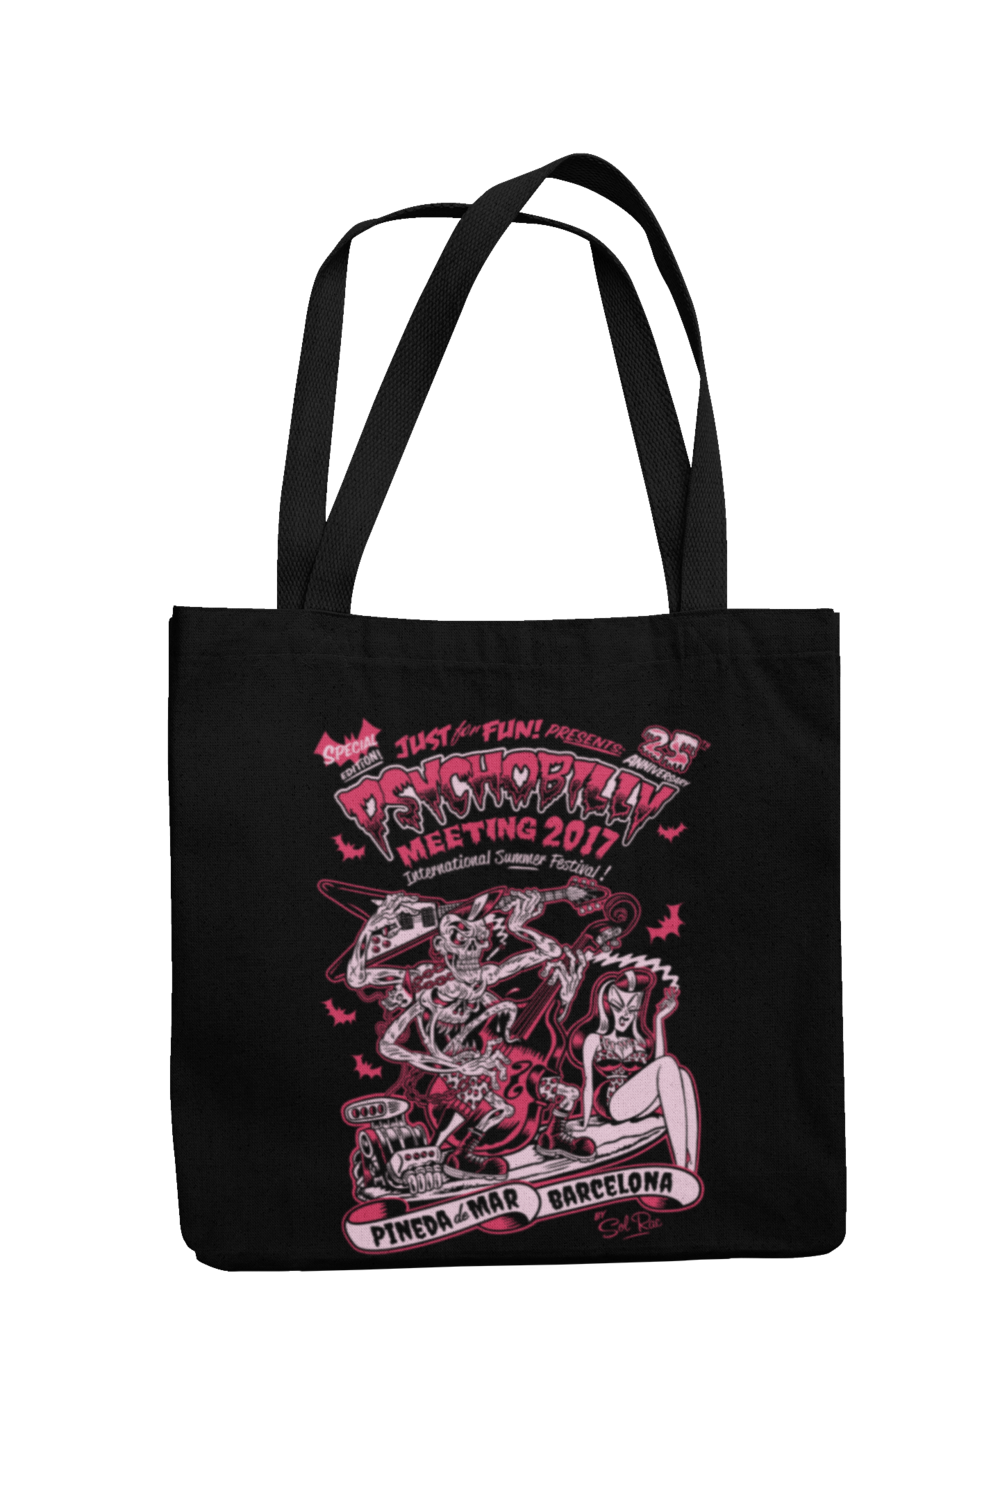 Cotton Bag Psychobilly meeting design by Solrac 2017